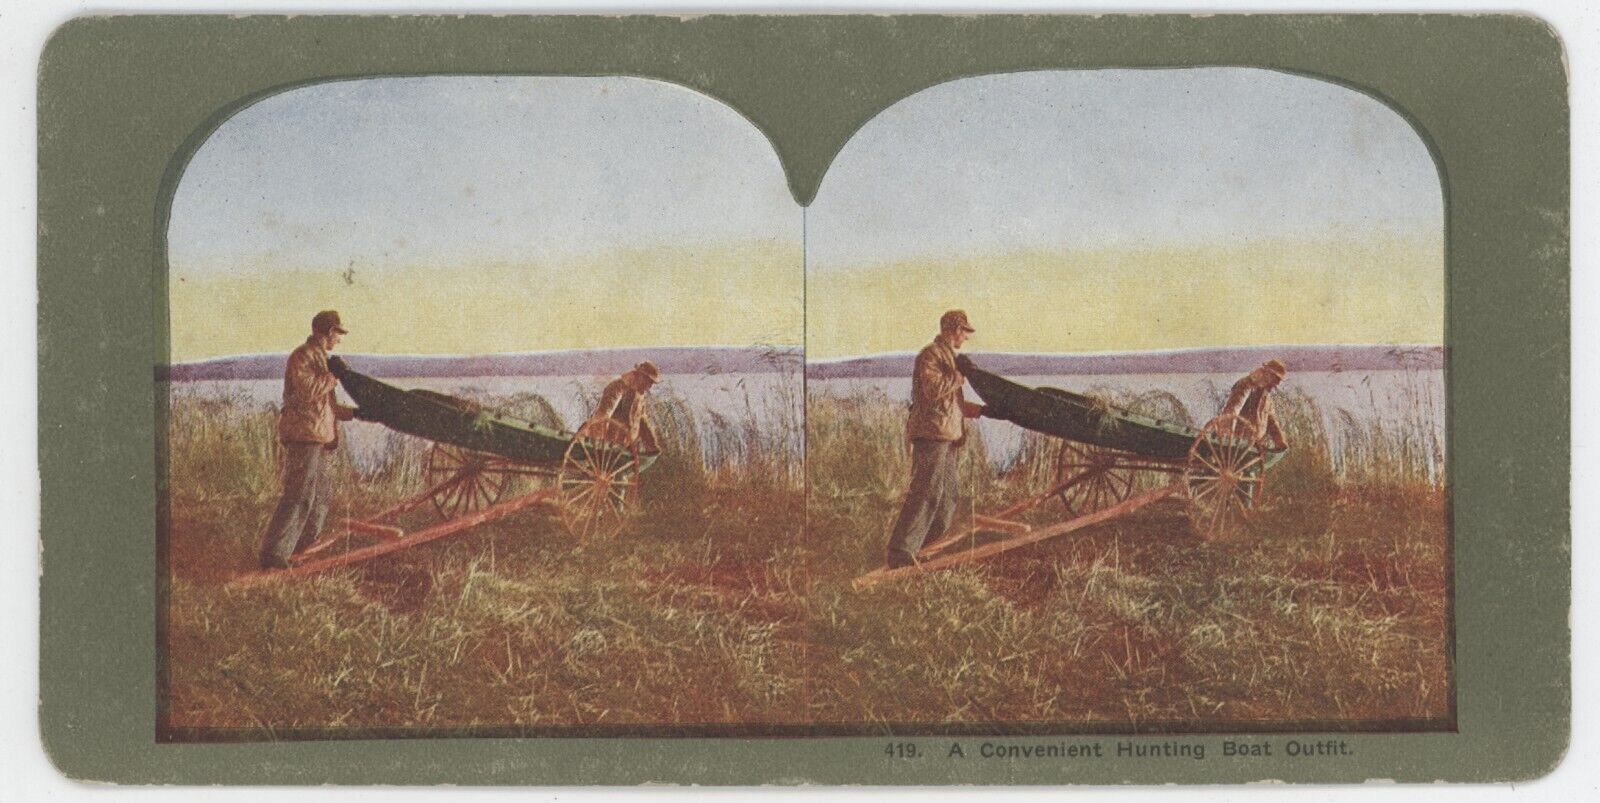 c1900's Colorized Stereoview A Convenient Hunting Boat Outfit. Men With a Canoe